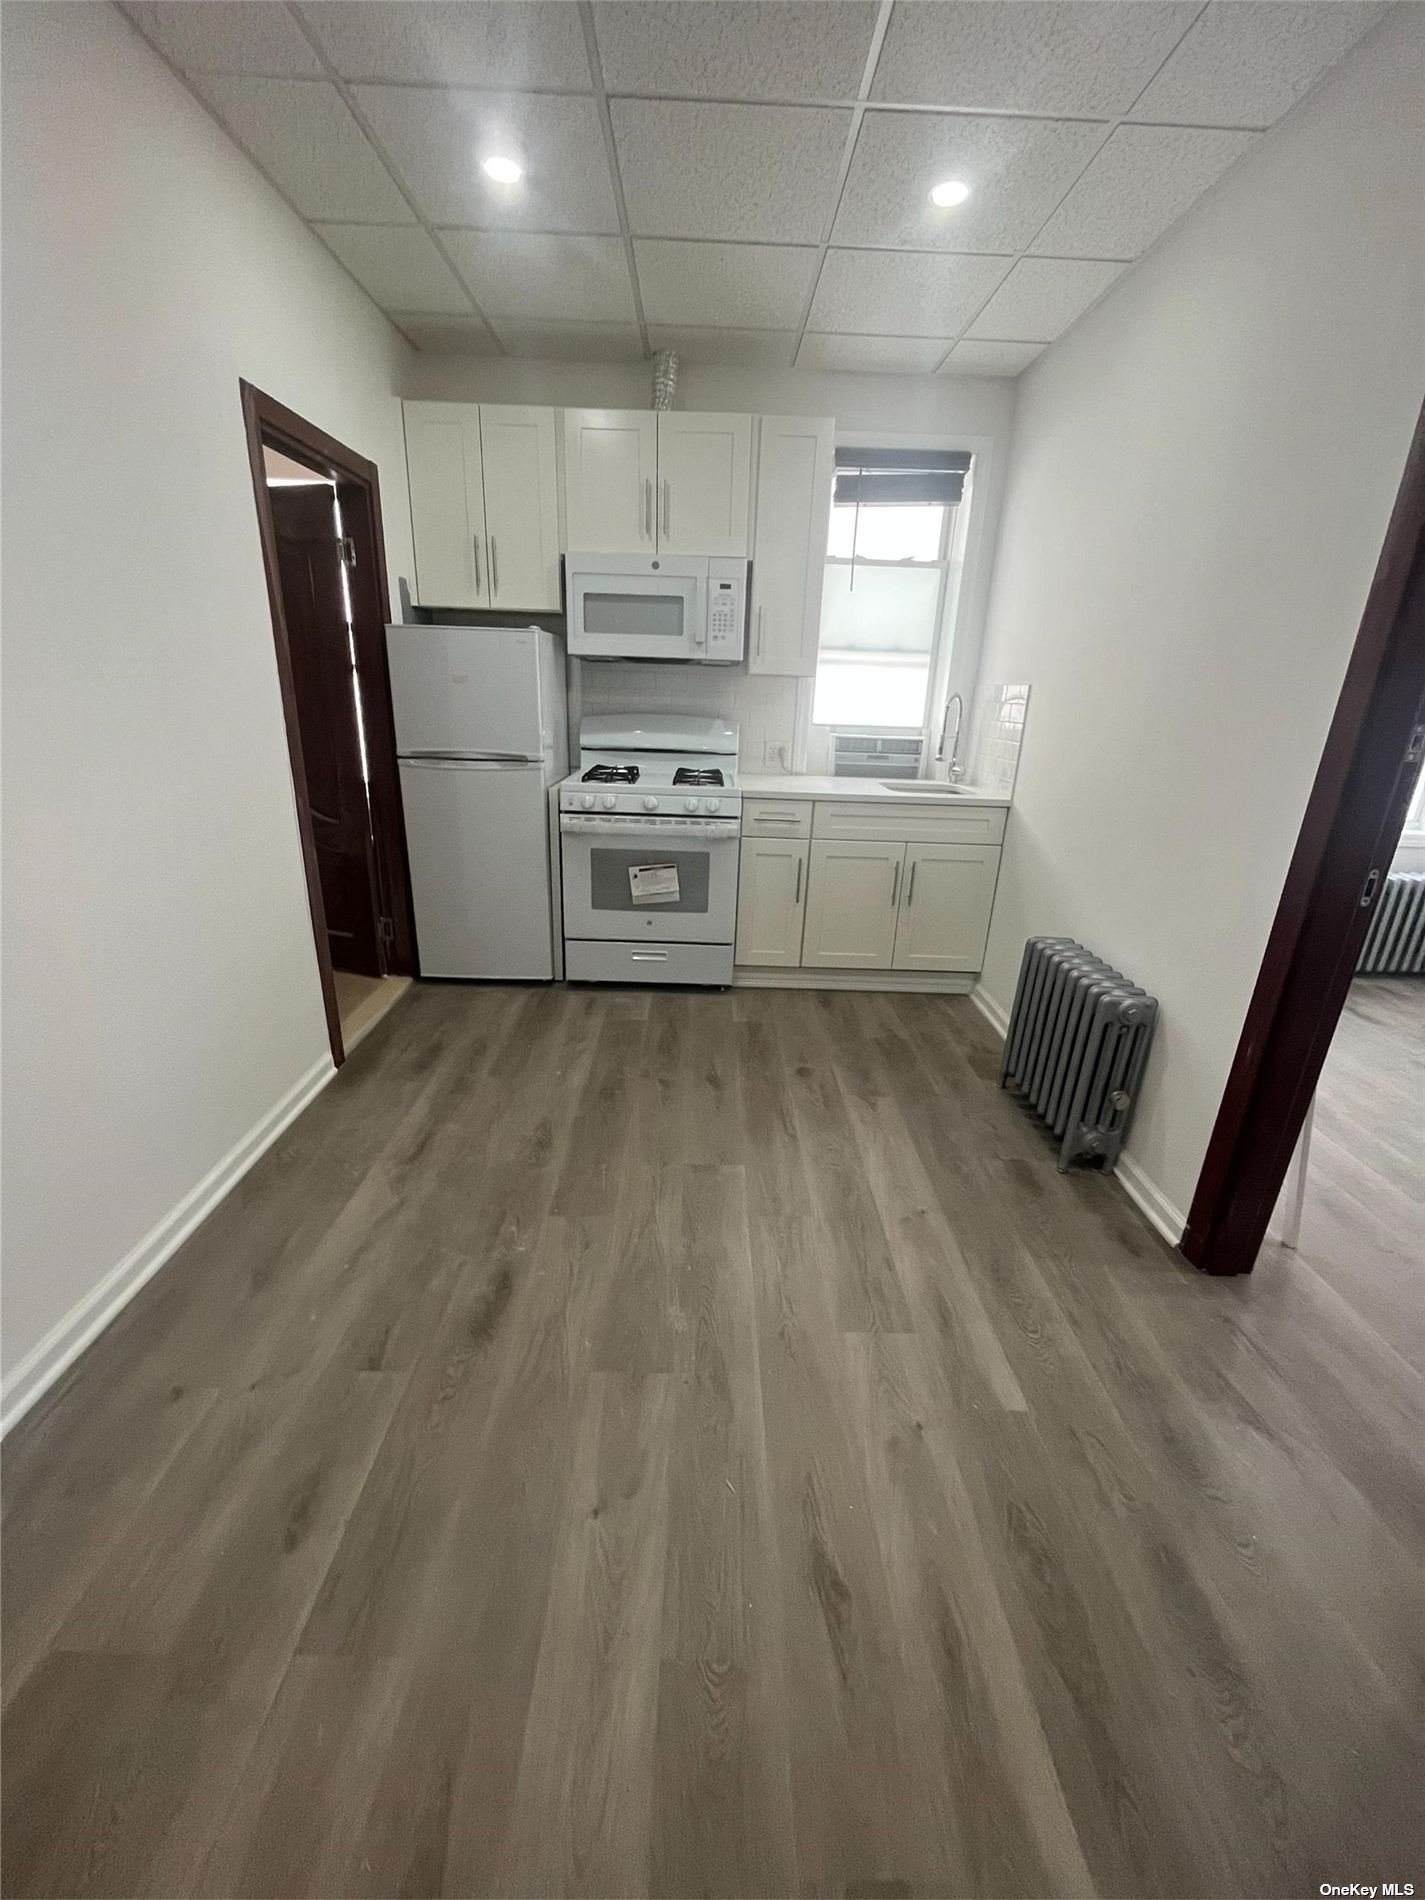 Apartment in Woodhaven - Jamaica  Queens, NY 11421